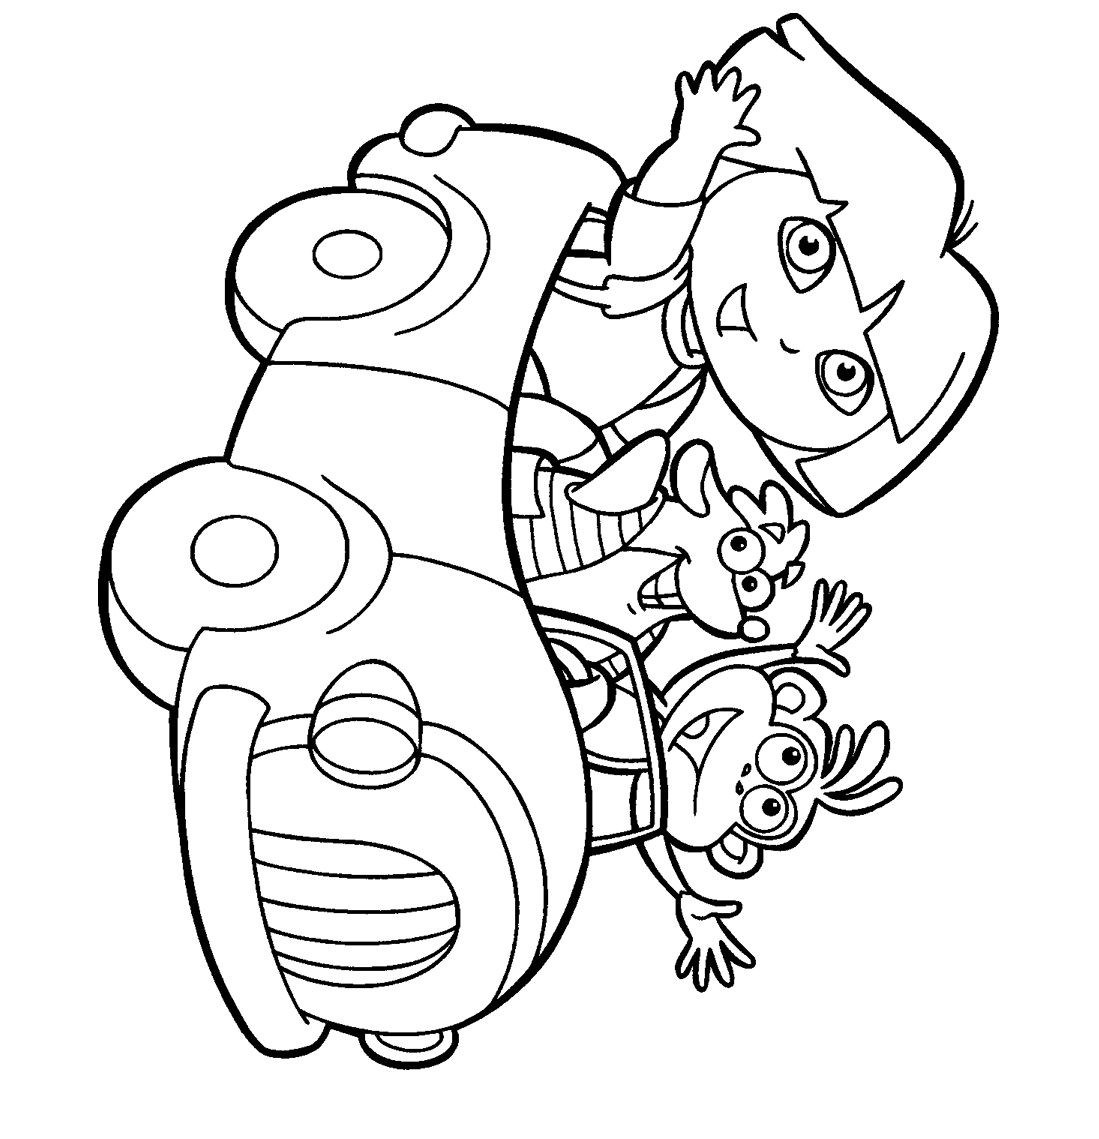 Printable coloring pages for kids Coloring Pages For Kids